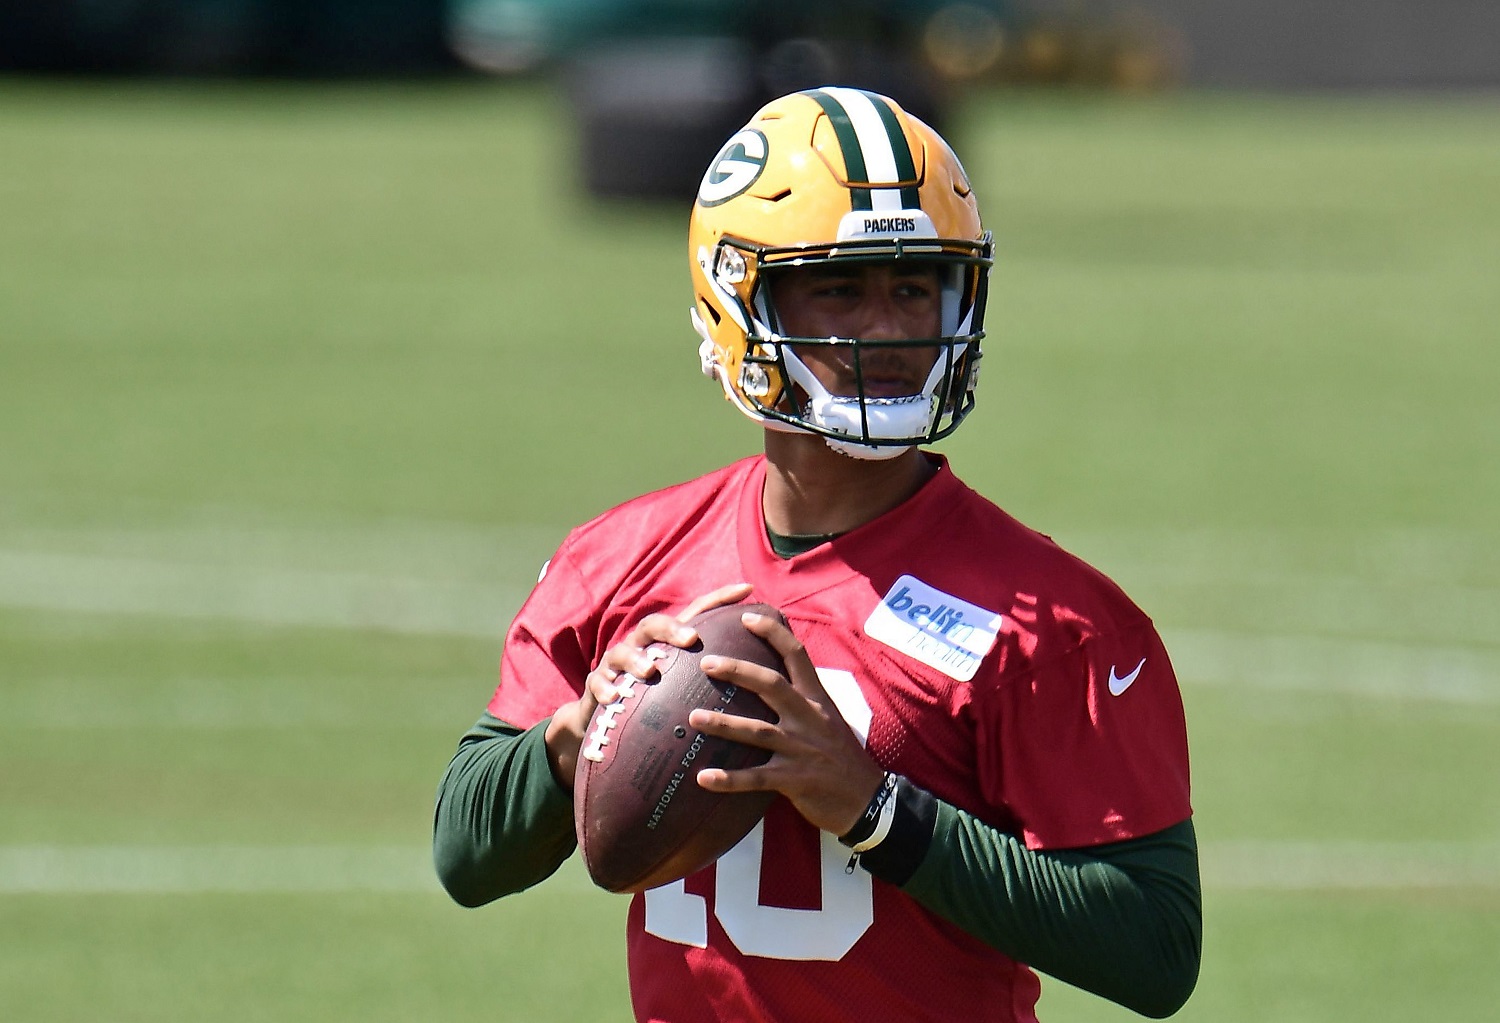 Jordan Love of the Green Bay Packers works out during training camp at Ray Nitschke Field on Aug. 17, 2020, in Ashwaubenon, Wisconsin.